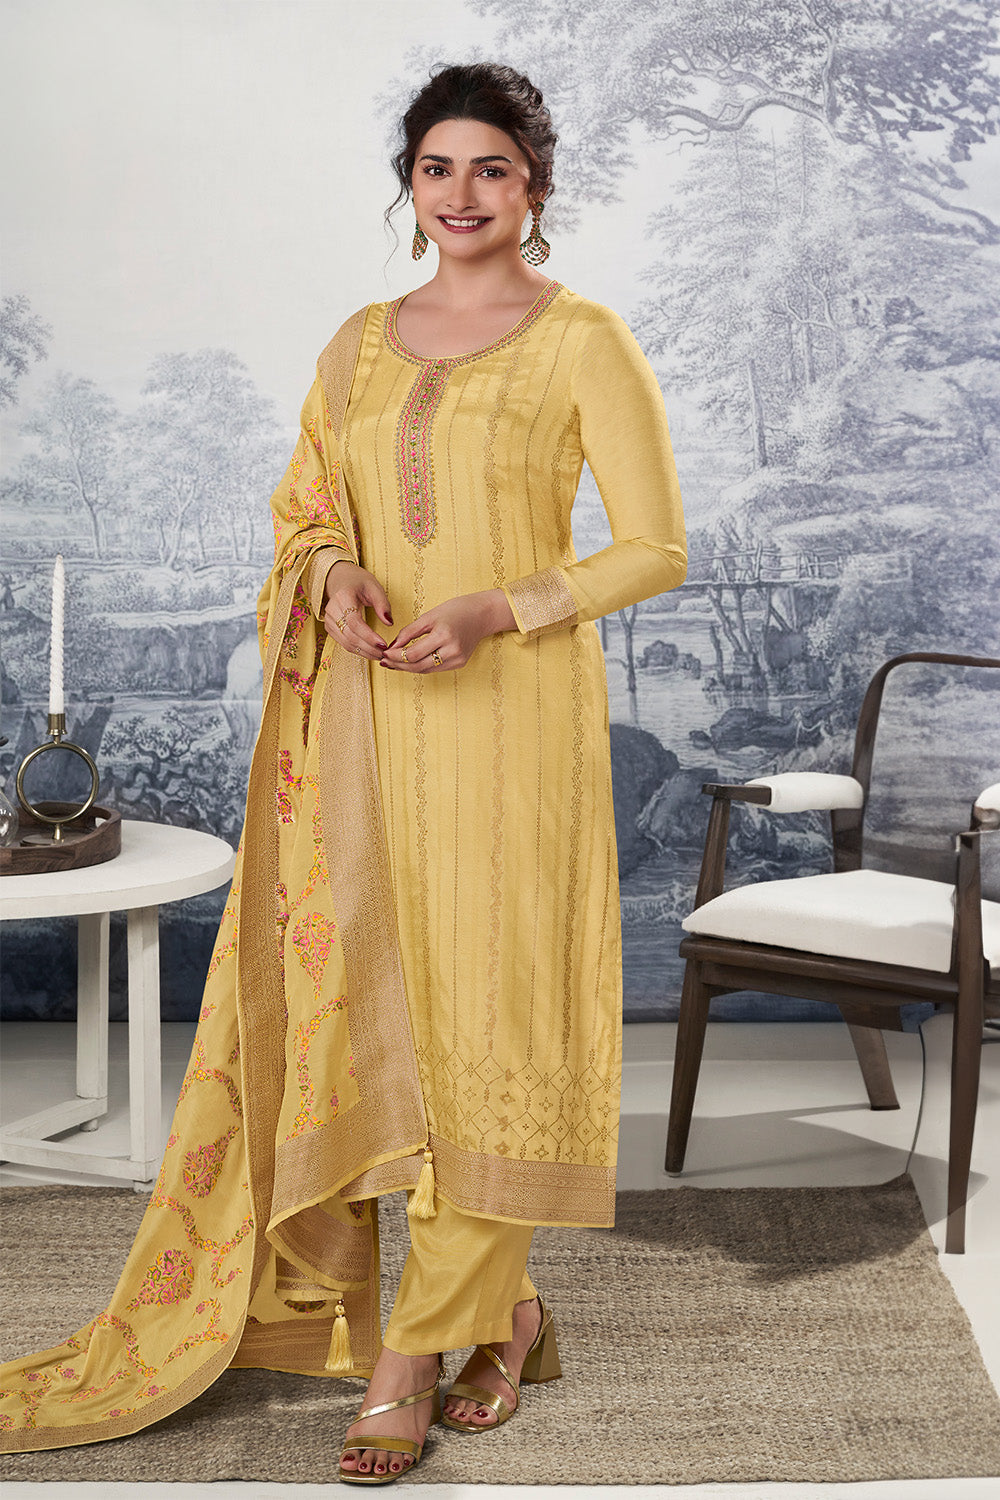 Yellow Color Chanderi Silk Zari Woven Unstitched Suit Material